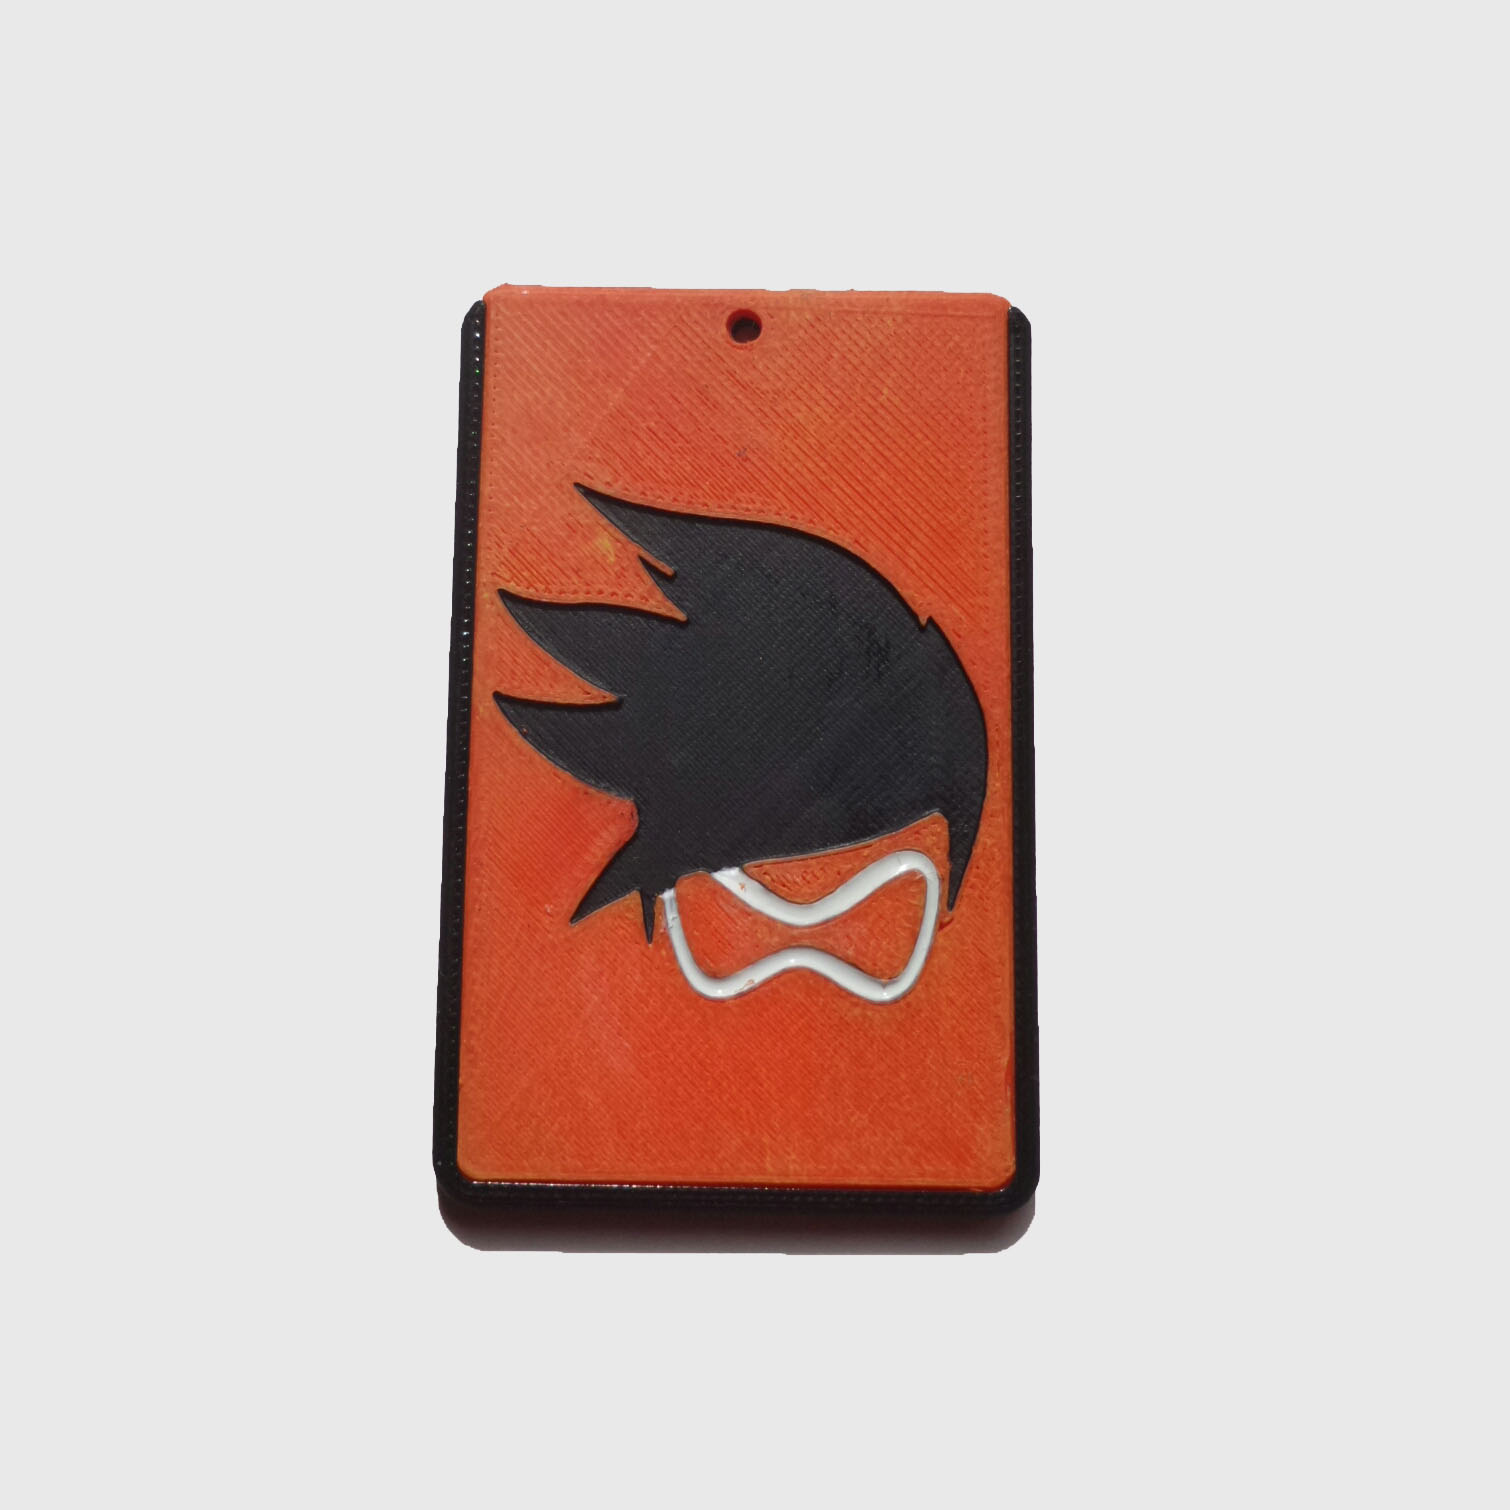 OVERWATCH - TRACER - ID card holder Credit Card Bus card case keyring